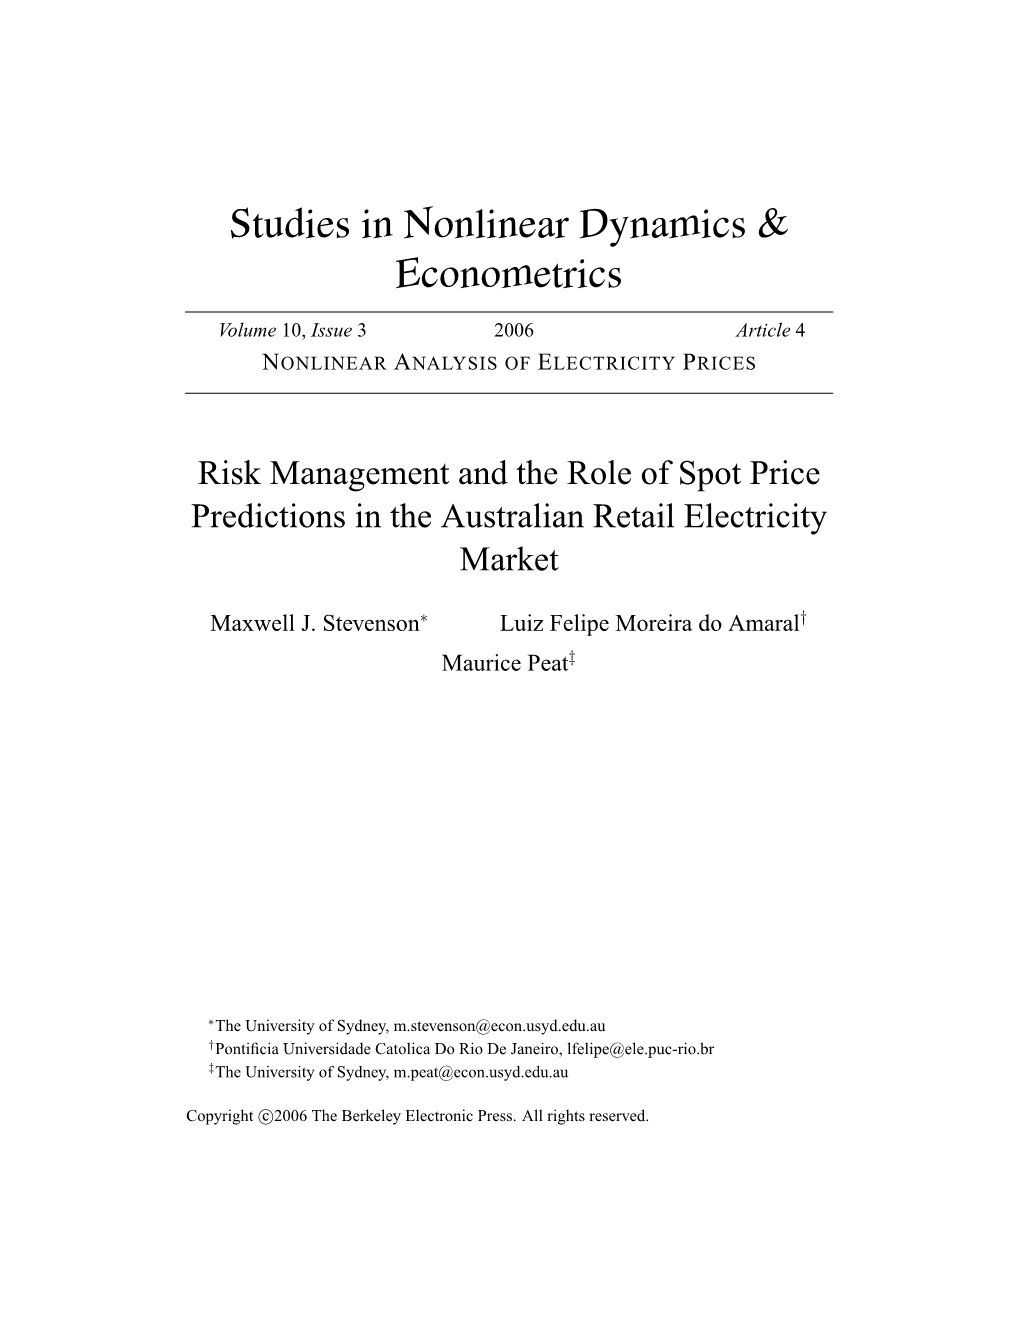 Risk Management and the Role of Spot Price Predictions in the Australian Retail Electricity Market